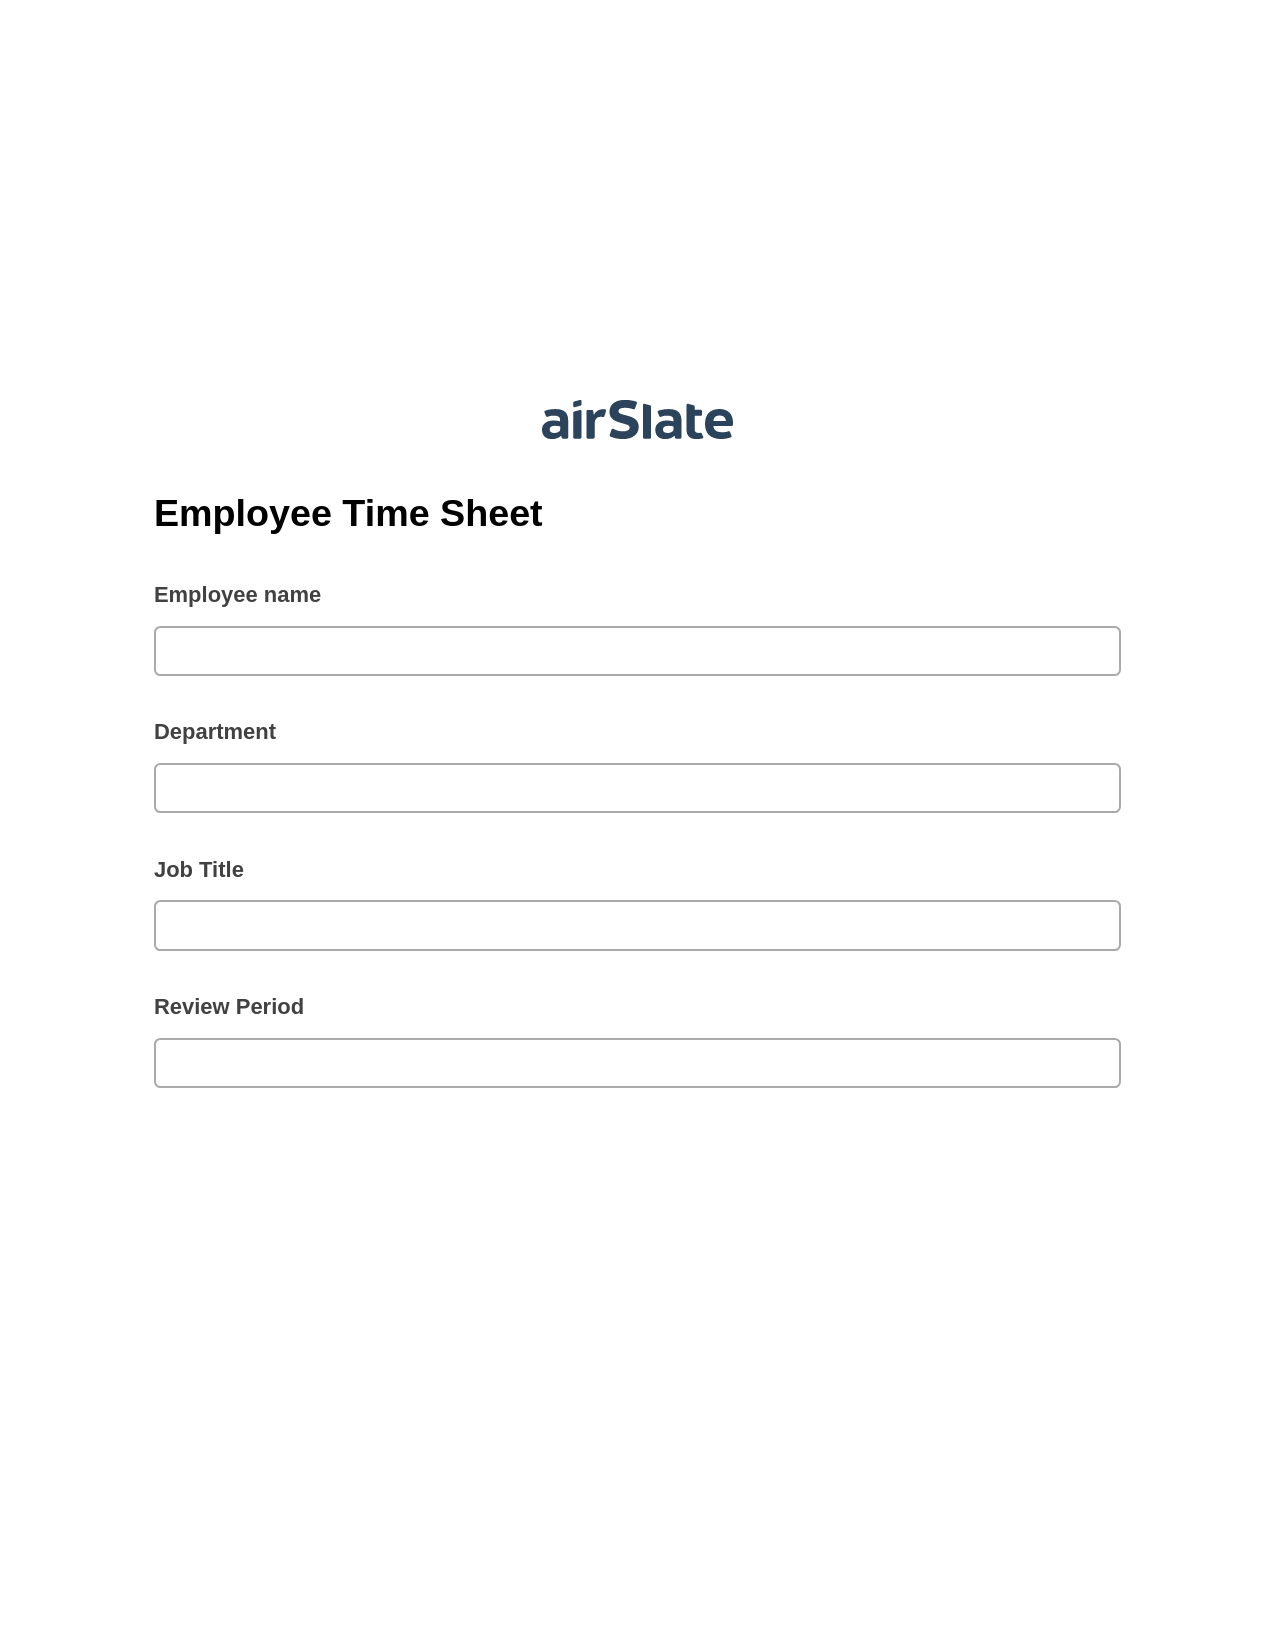 Employee Time Sheet Pre-fill from MySQL Bot, Create Salesforce Records Bot, Archive to SharePoint Folder Bot